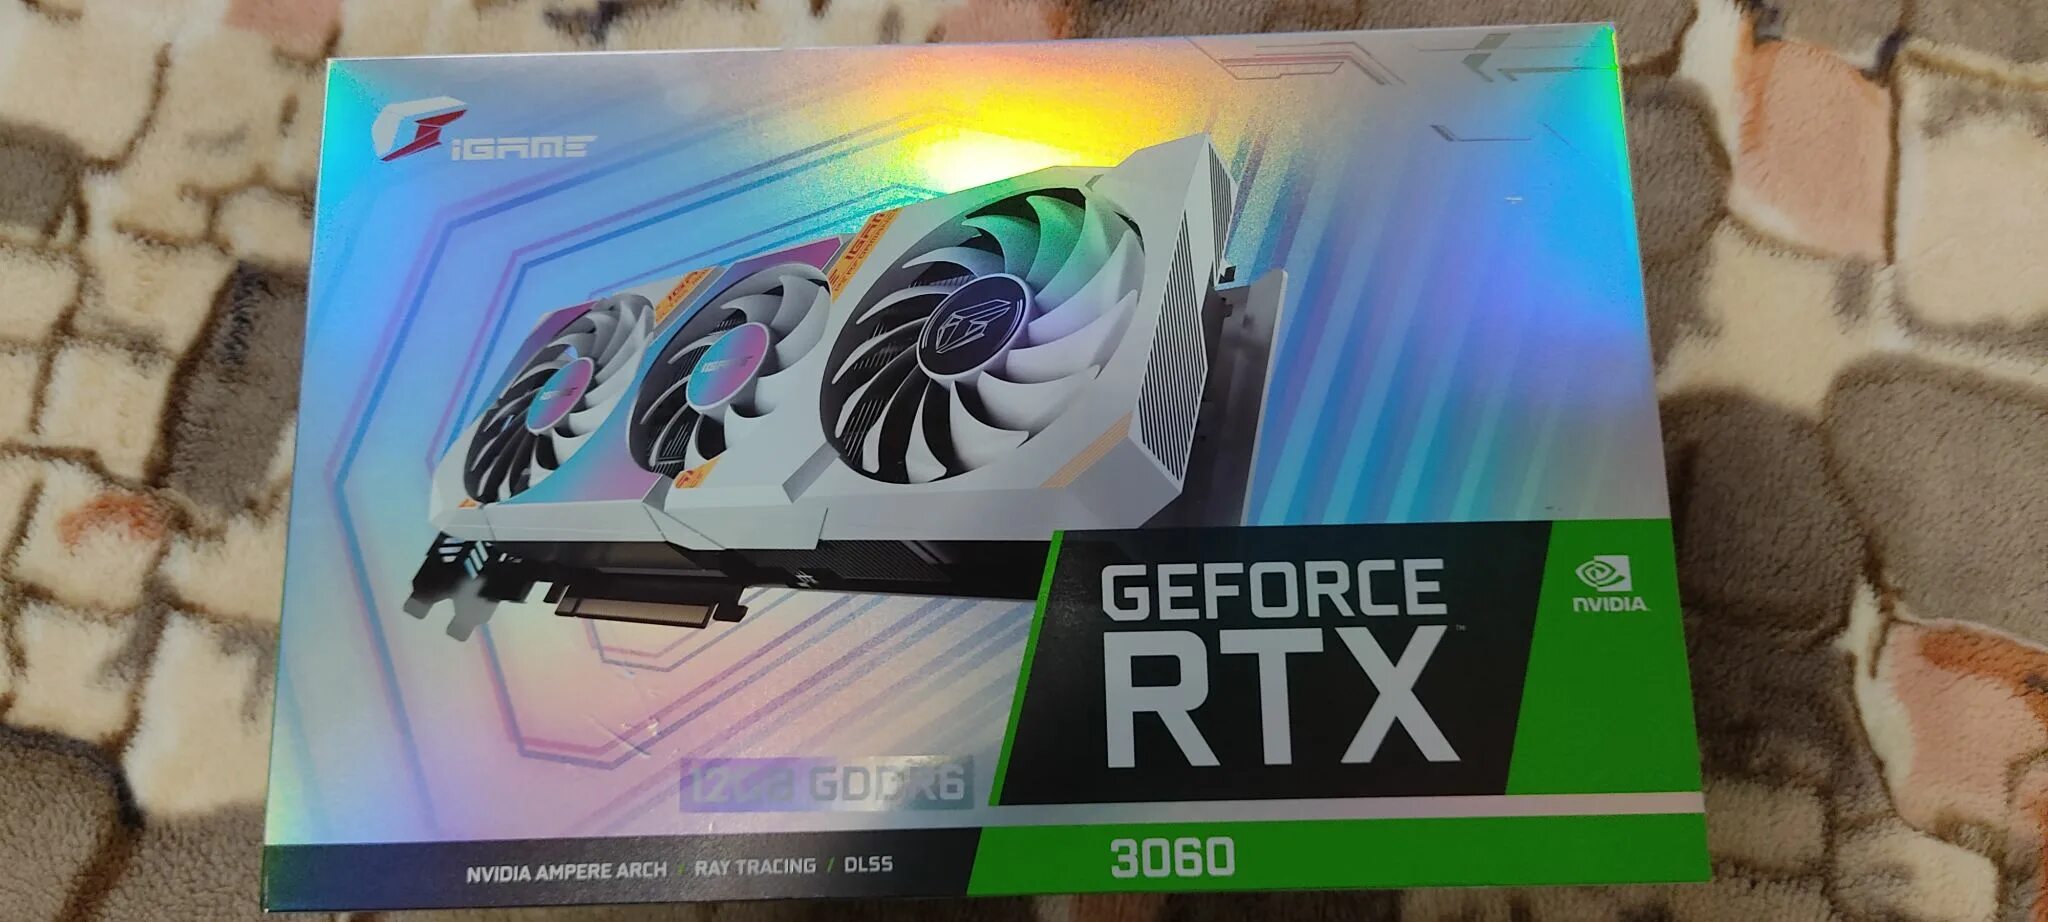 RTX 3060 ультра. Colorful IGAME GEFORCE RTX 3060 Ultra w OC 12g l-v. 3060 Ultra w. Colorful RTX 3060 Ultra w OC. Colorful rtx 3060 ultra 12g